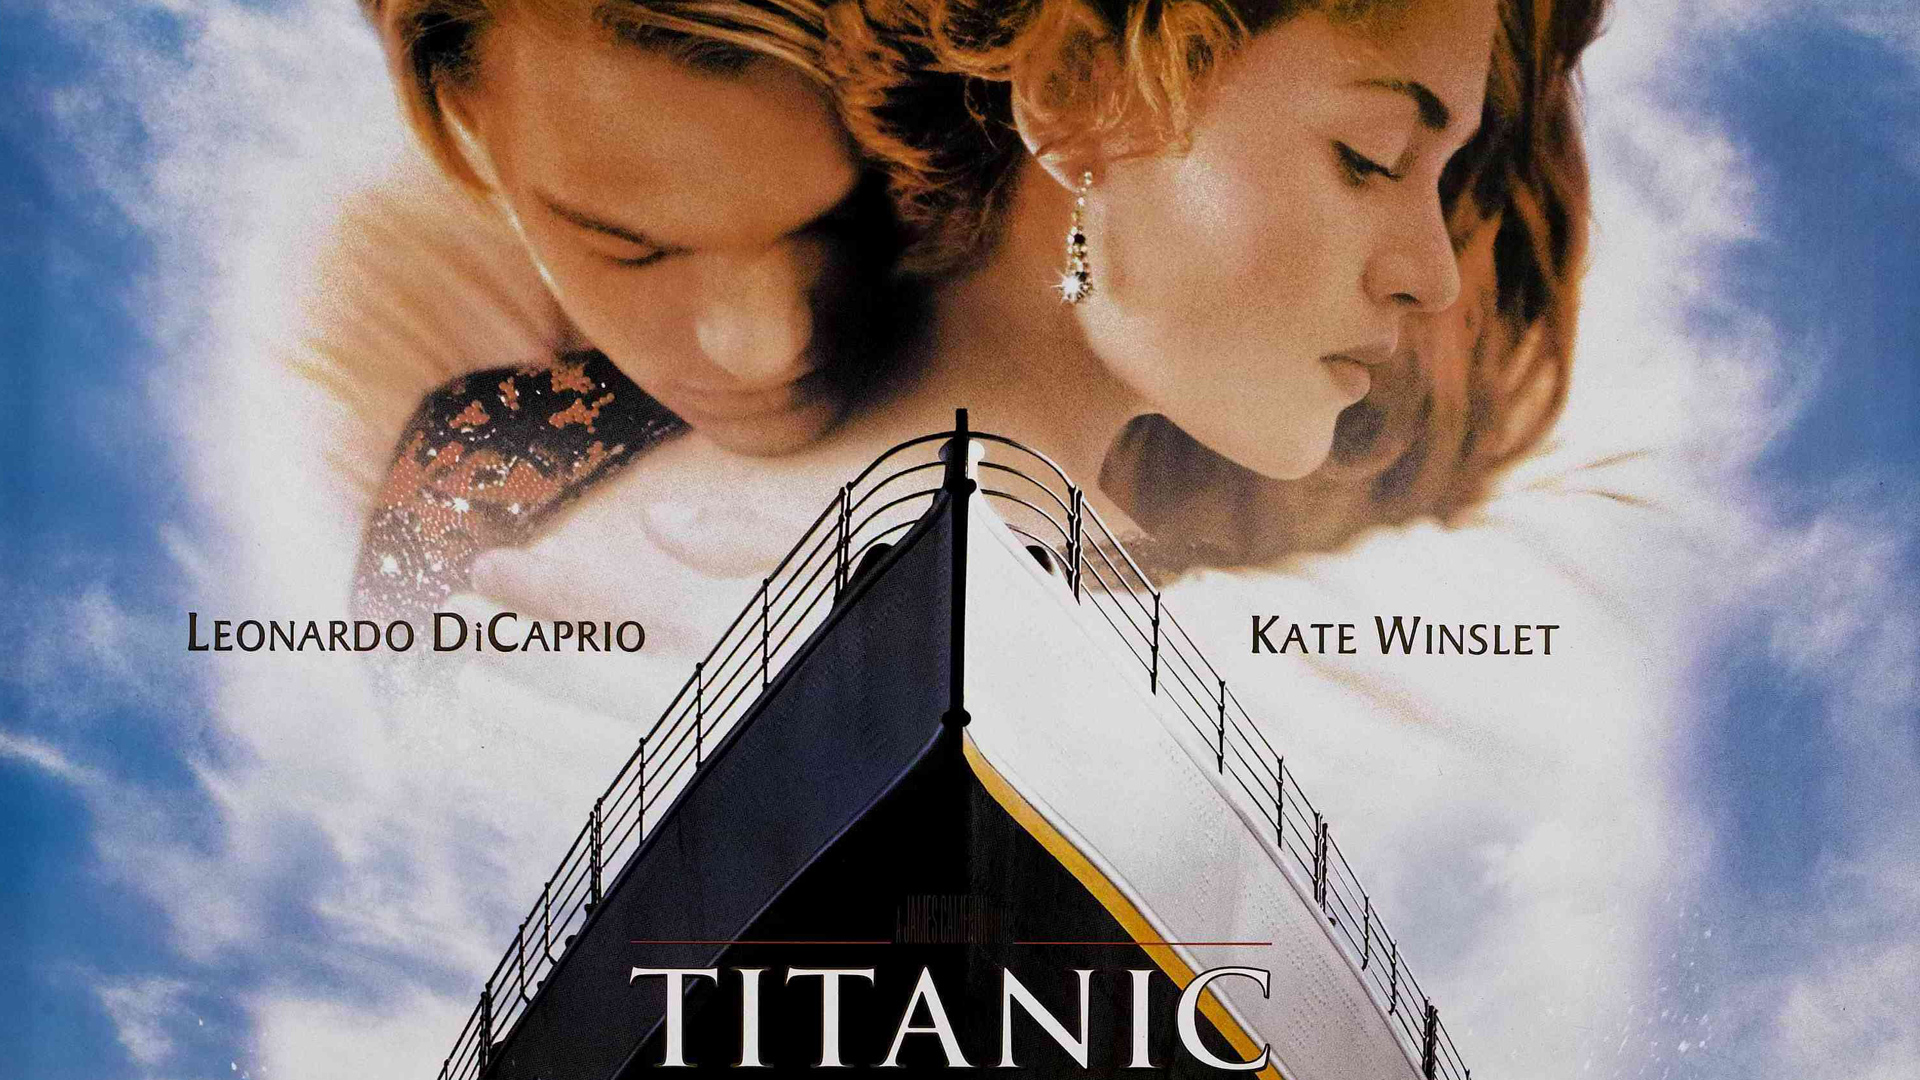 Titanic Movie Wallpapers HD Wallpapers 1920x1080